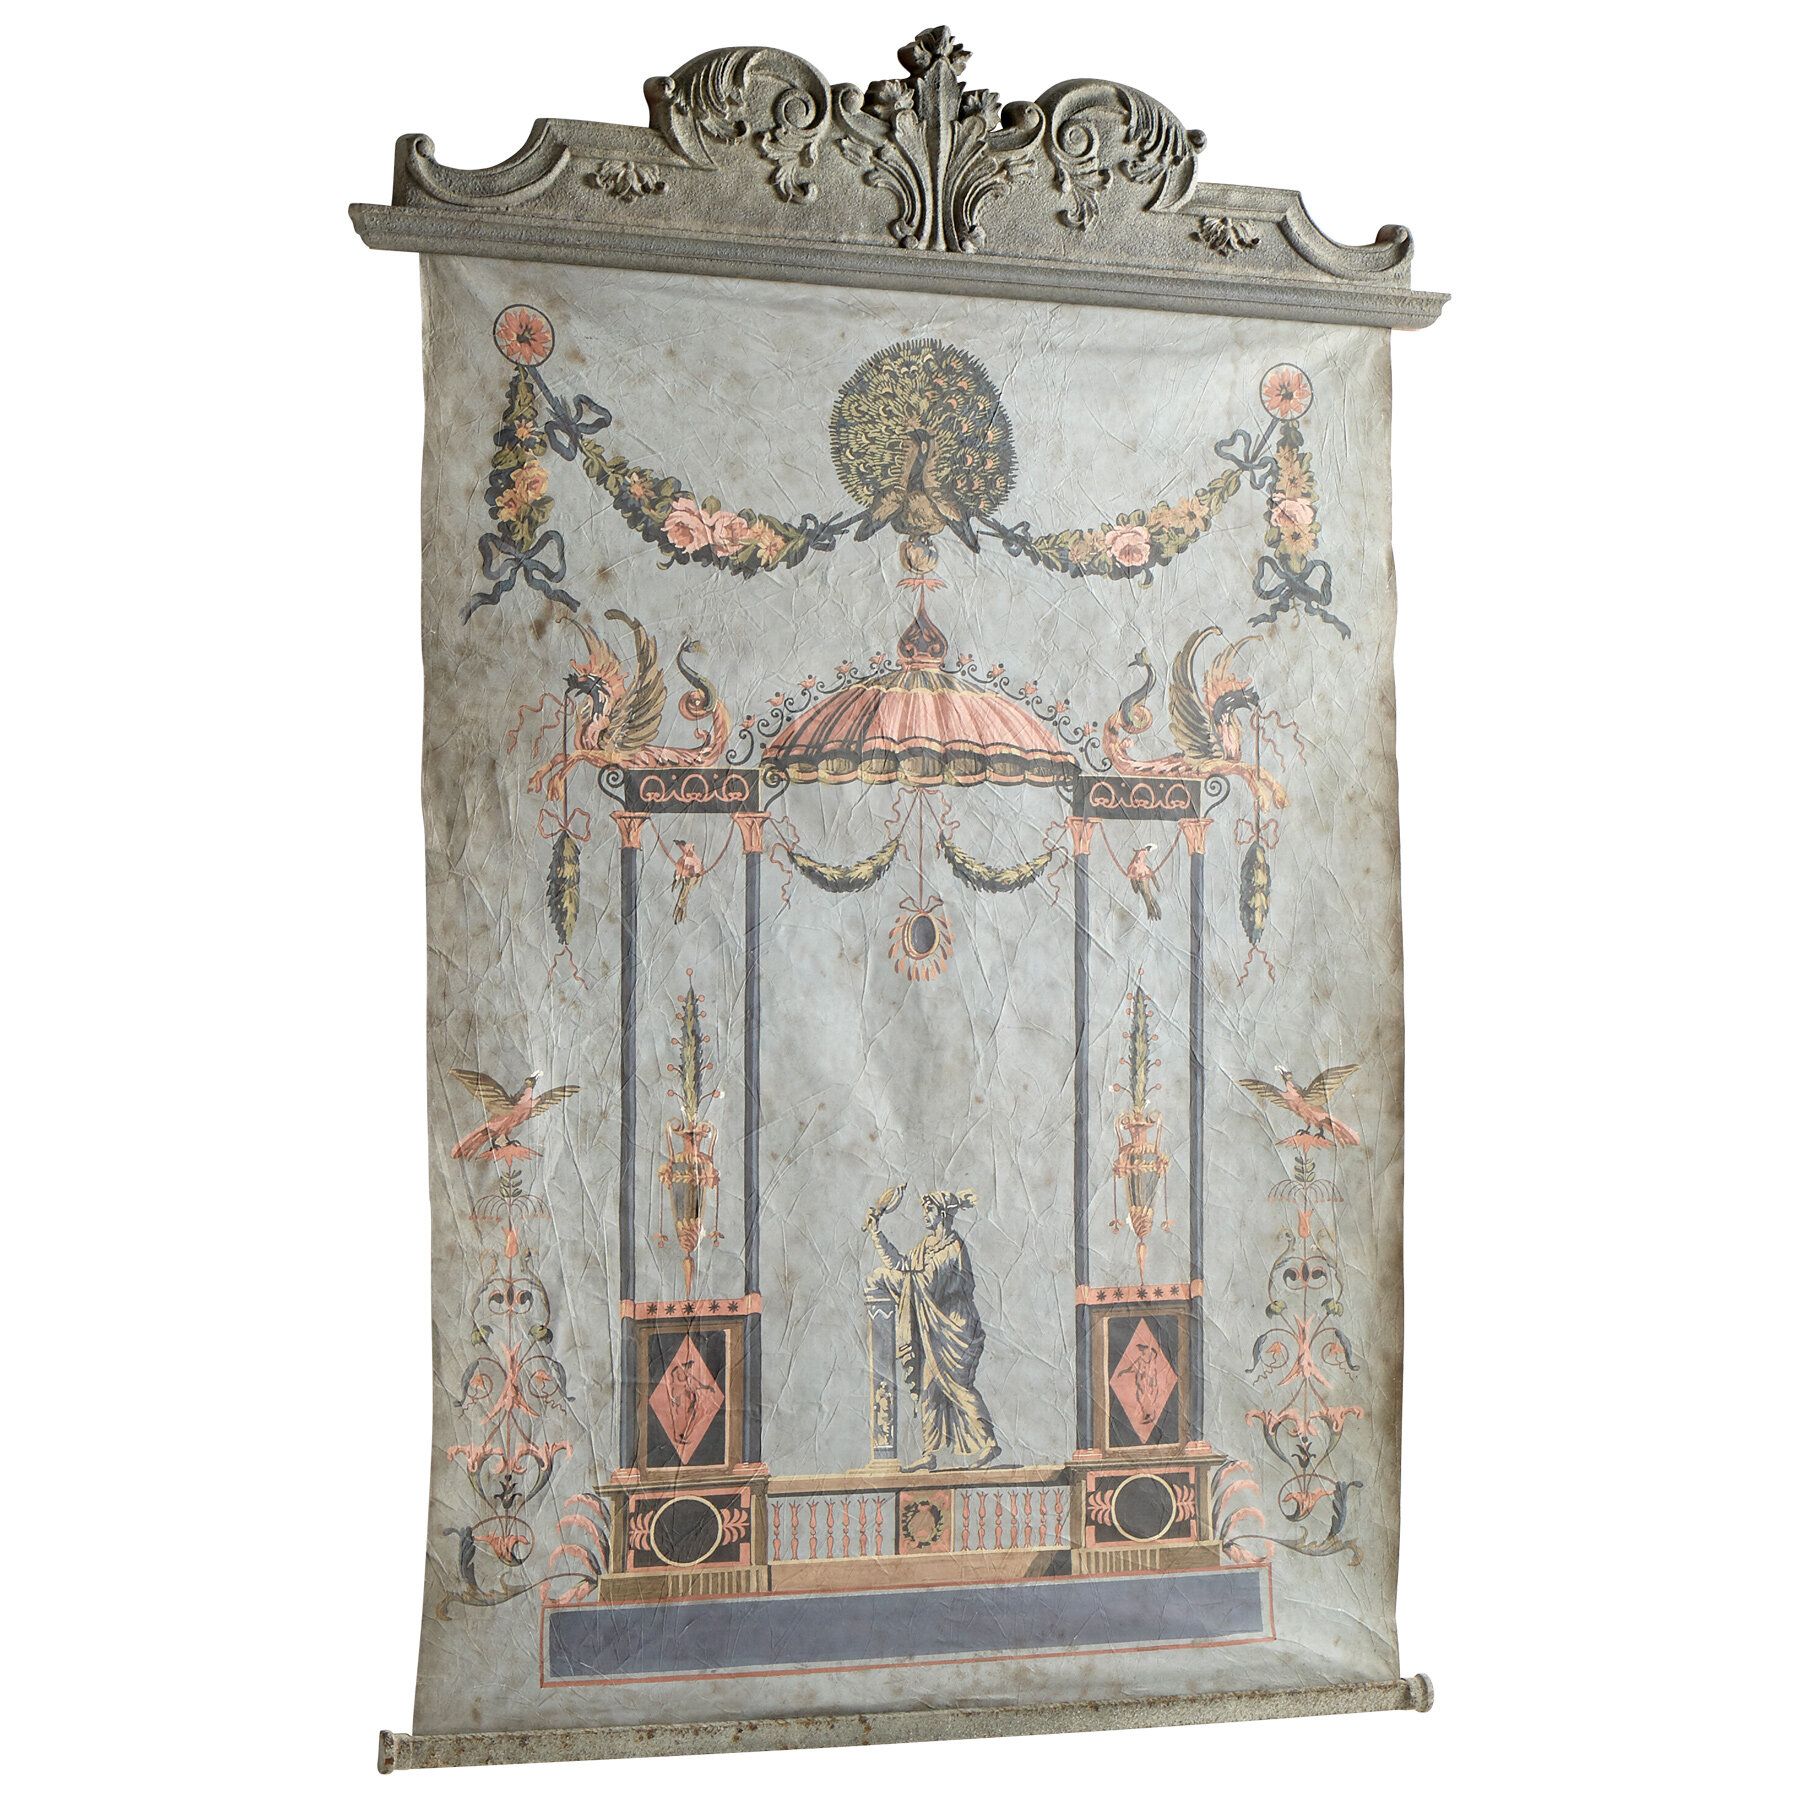 Blended Fabric Ethereal Days Chinoiserie Wall Hanging With Rod Intended For Most Recently Released Blended Fabric Ethereal Days Chinoiserie Wall Hangings With Rod (View 1 of 20)